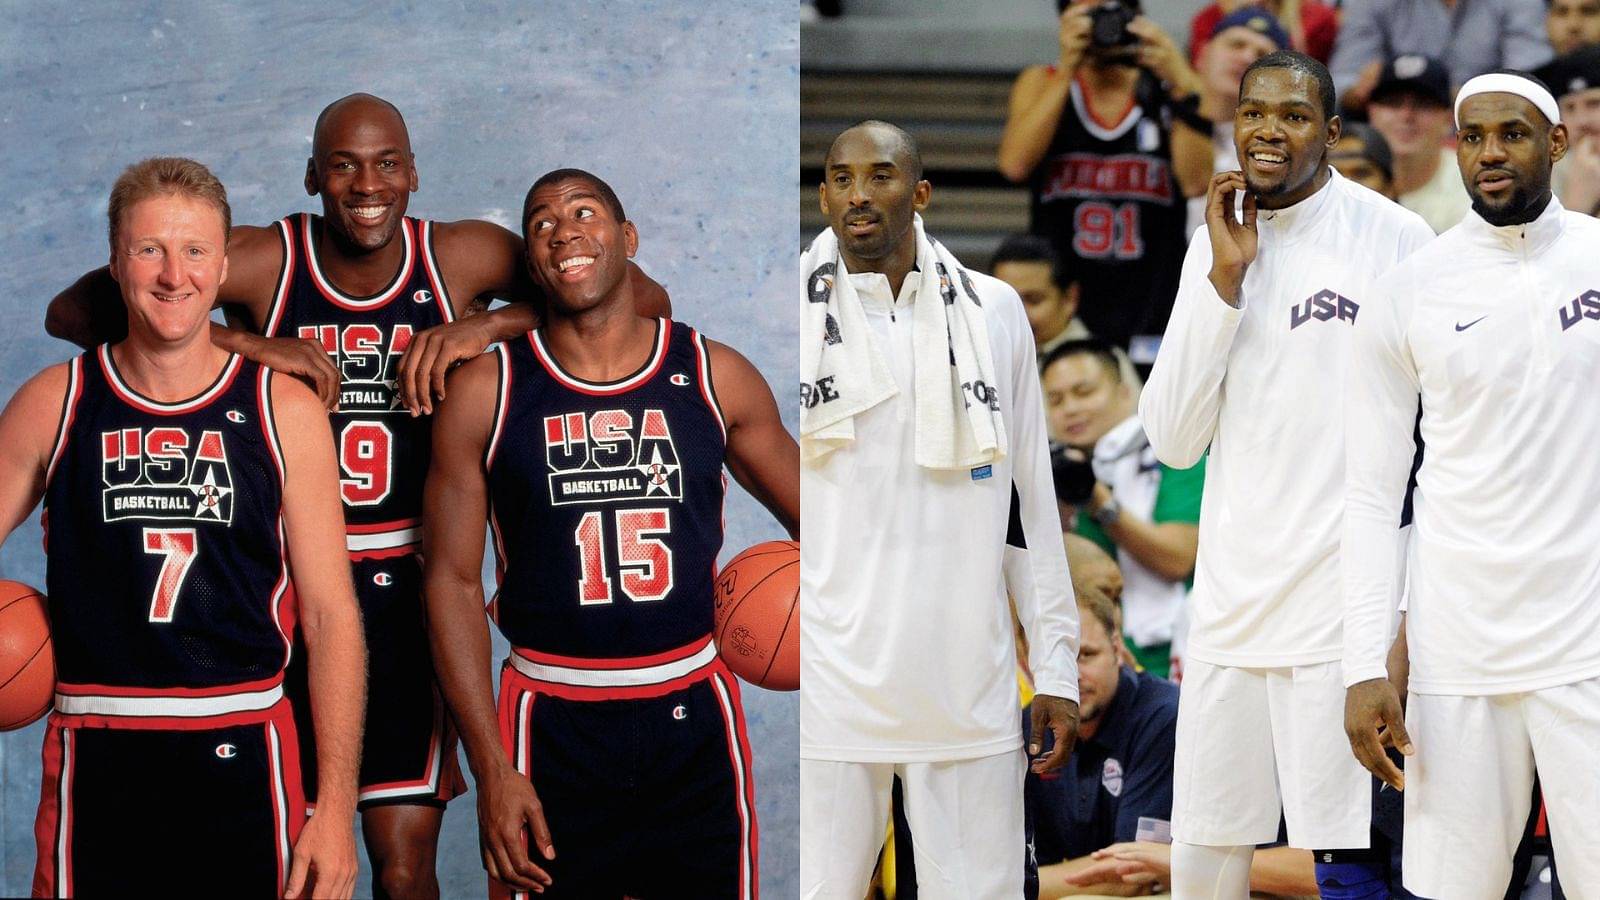 “Kobe Bryant, LeBron James, and Kevin Durant”: Shannon Sharpe answers NBA Twitter on who could defeat the trio of Michael Jordan, Magic Johnson, and Larry Bird